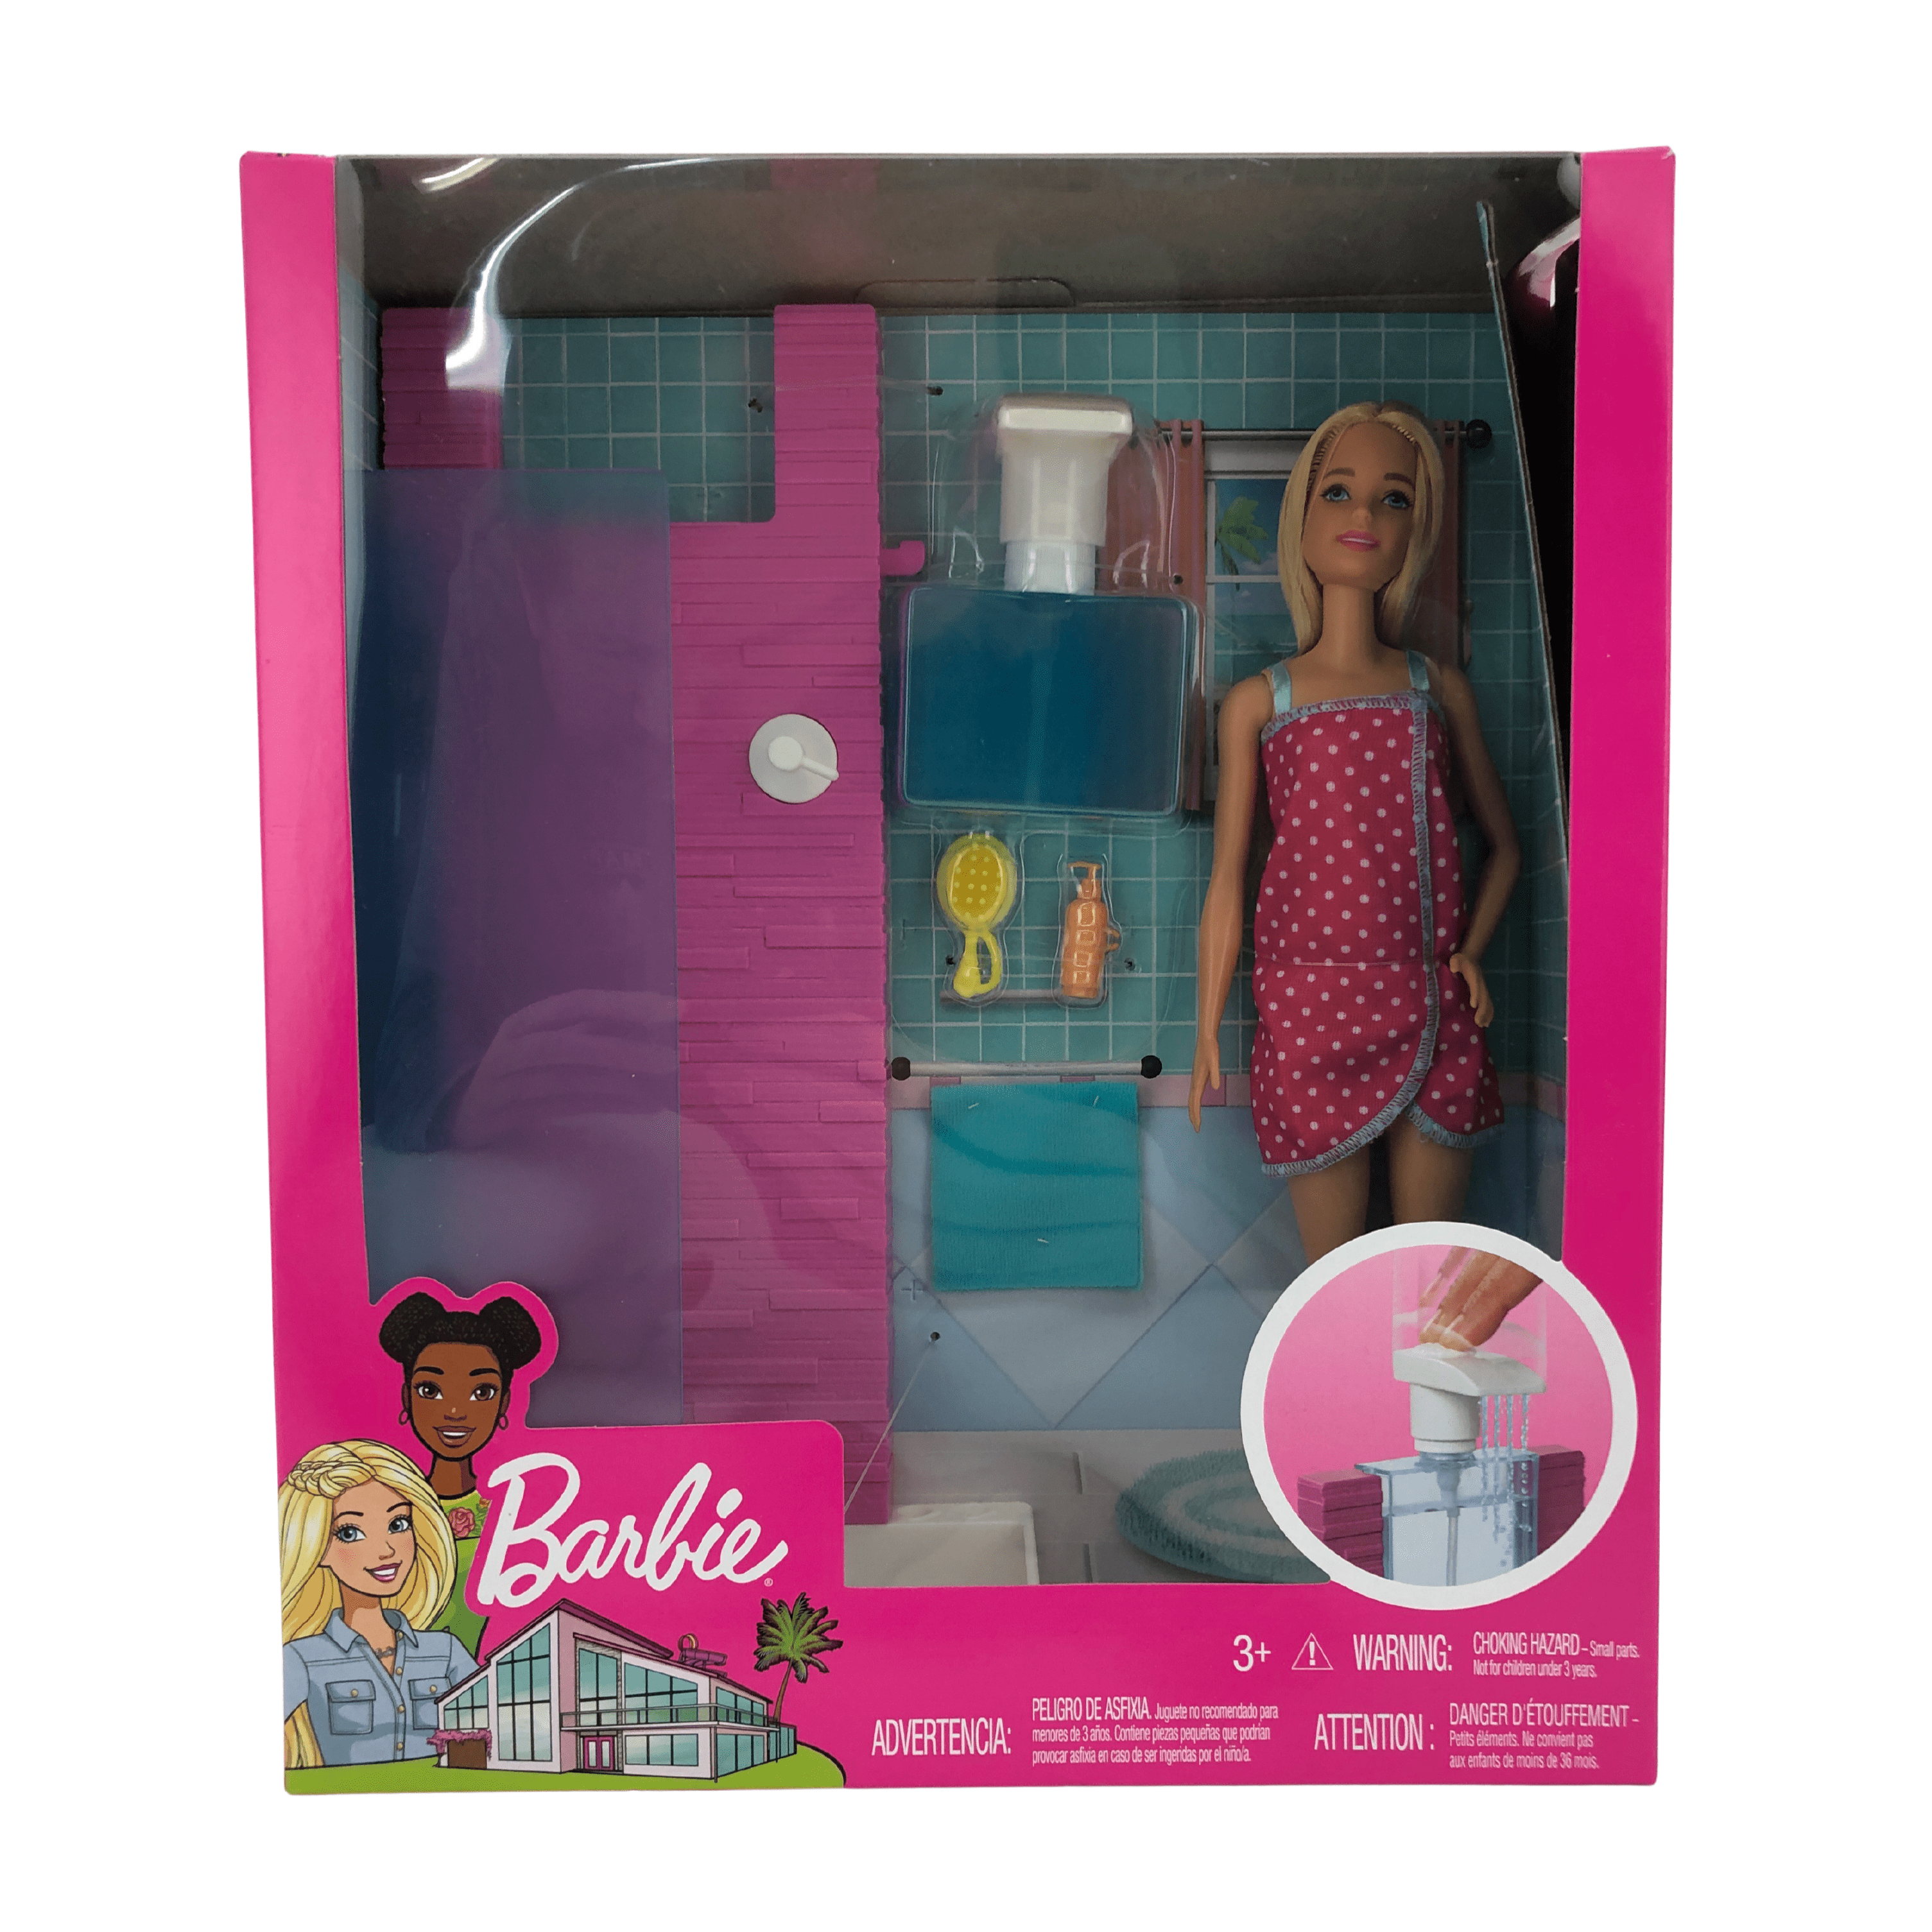 Barbie Shower playset with real working shower